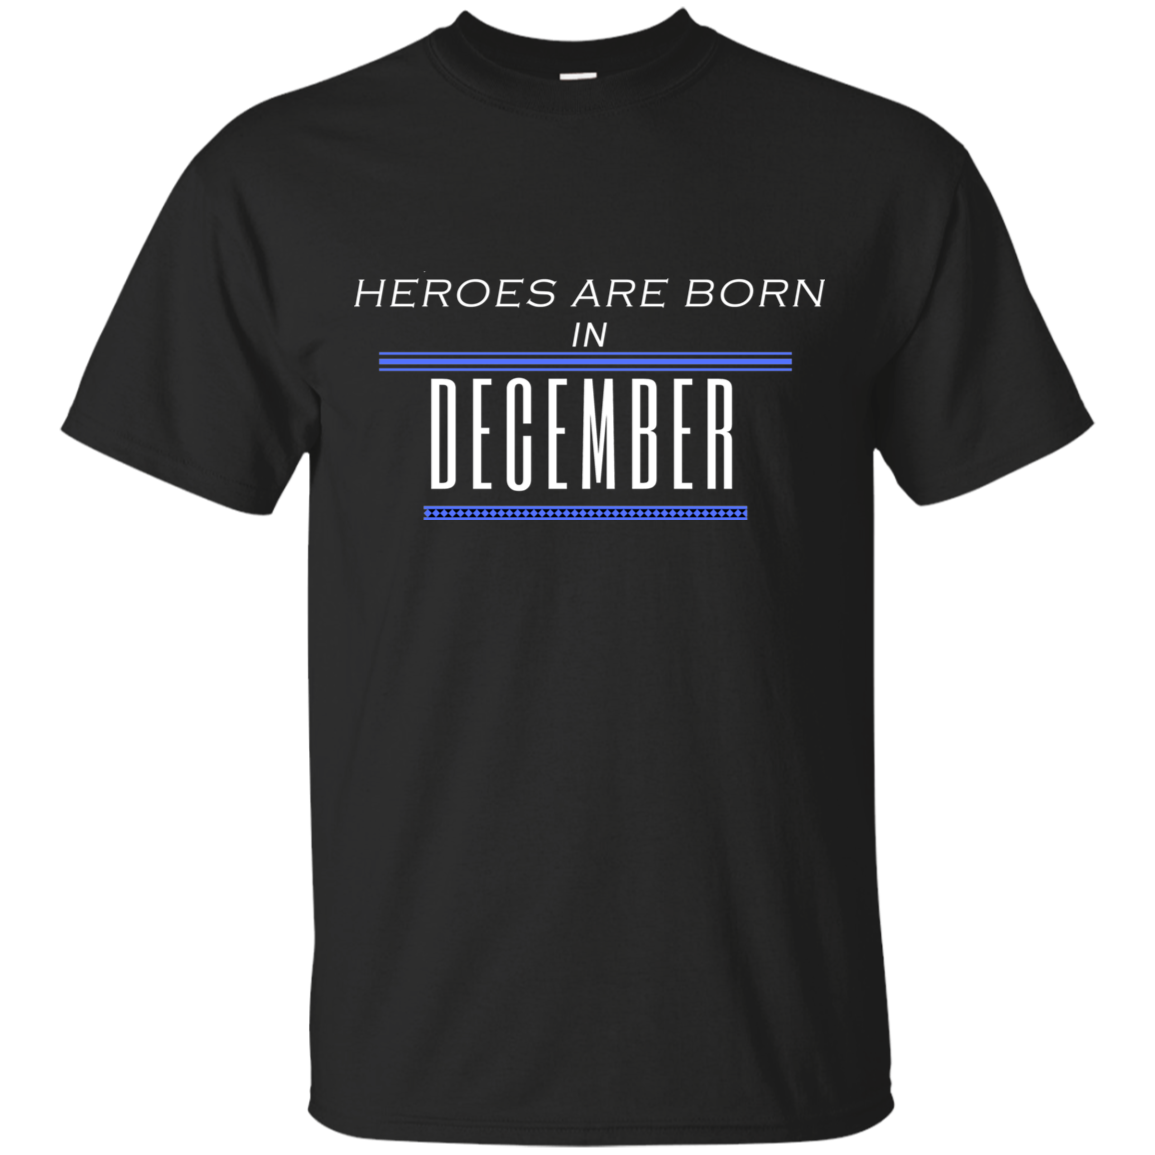 Heroes Are Born in December